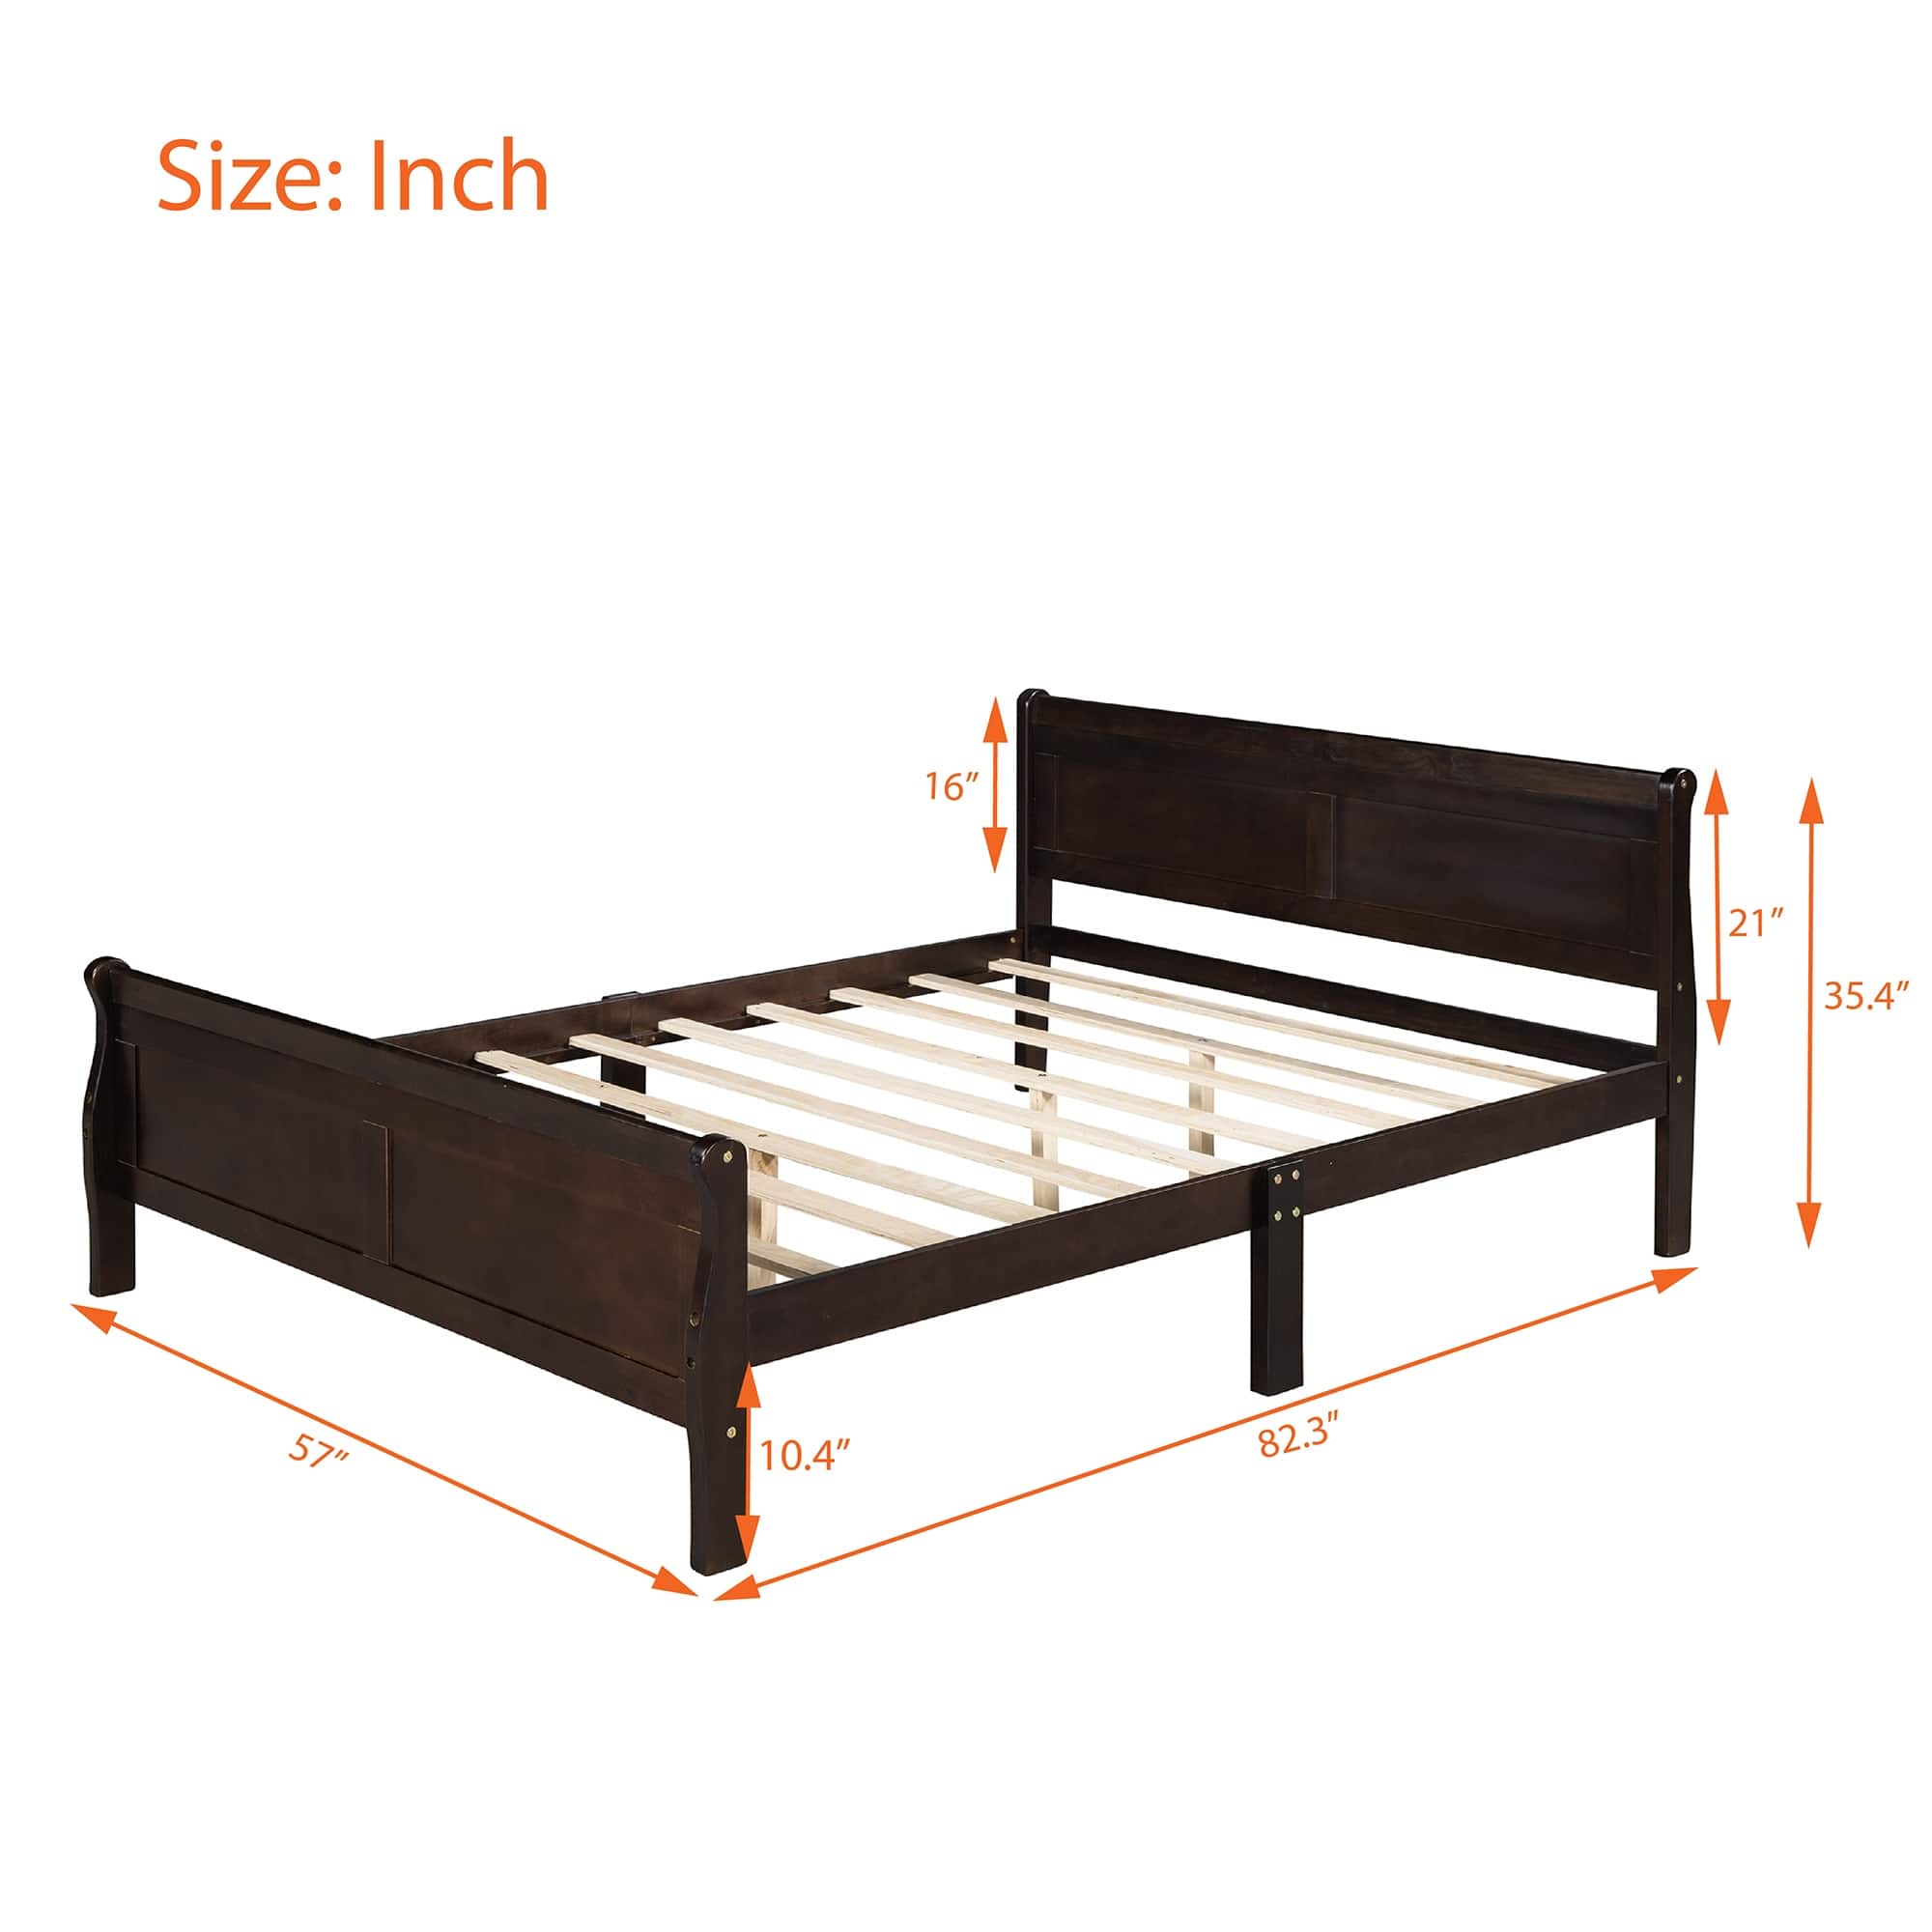 Full Wood Platform Bed Frame Sleigh Bed with Headboard, Footboard ...